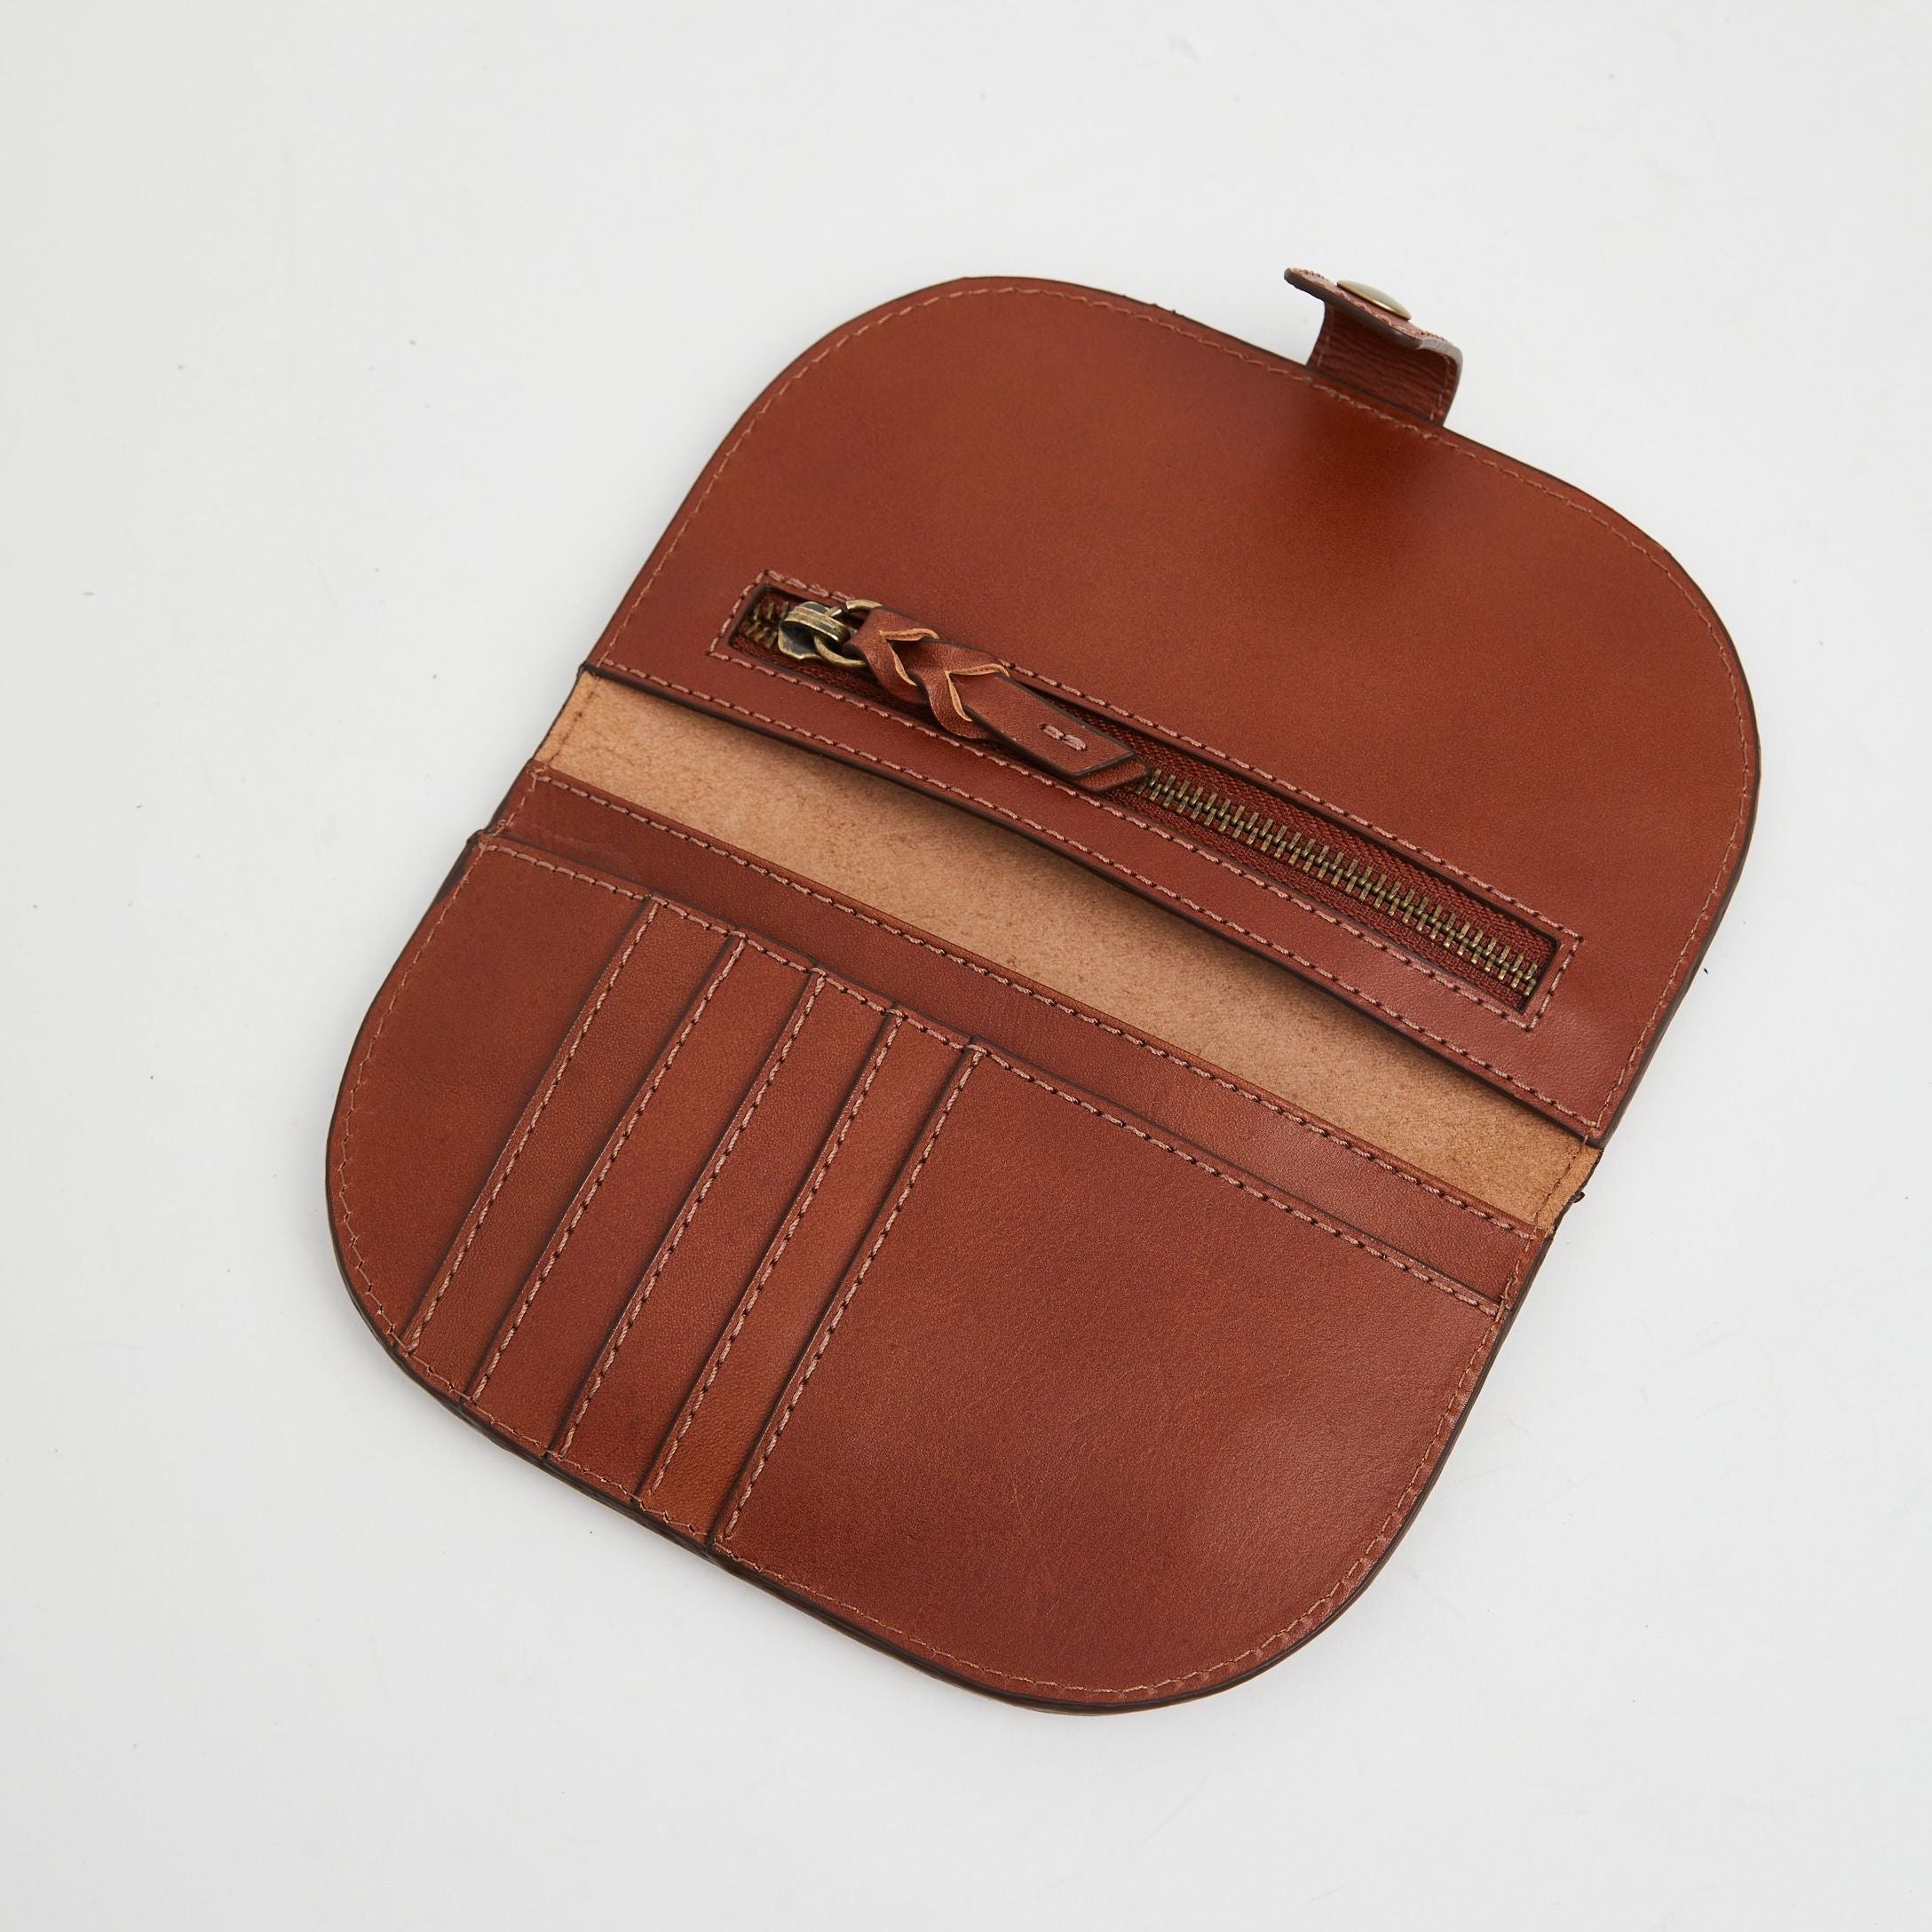 ABLE Marisol Wallet whiskey leather